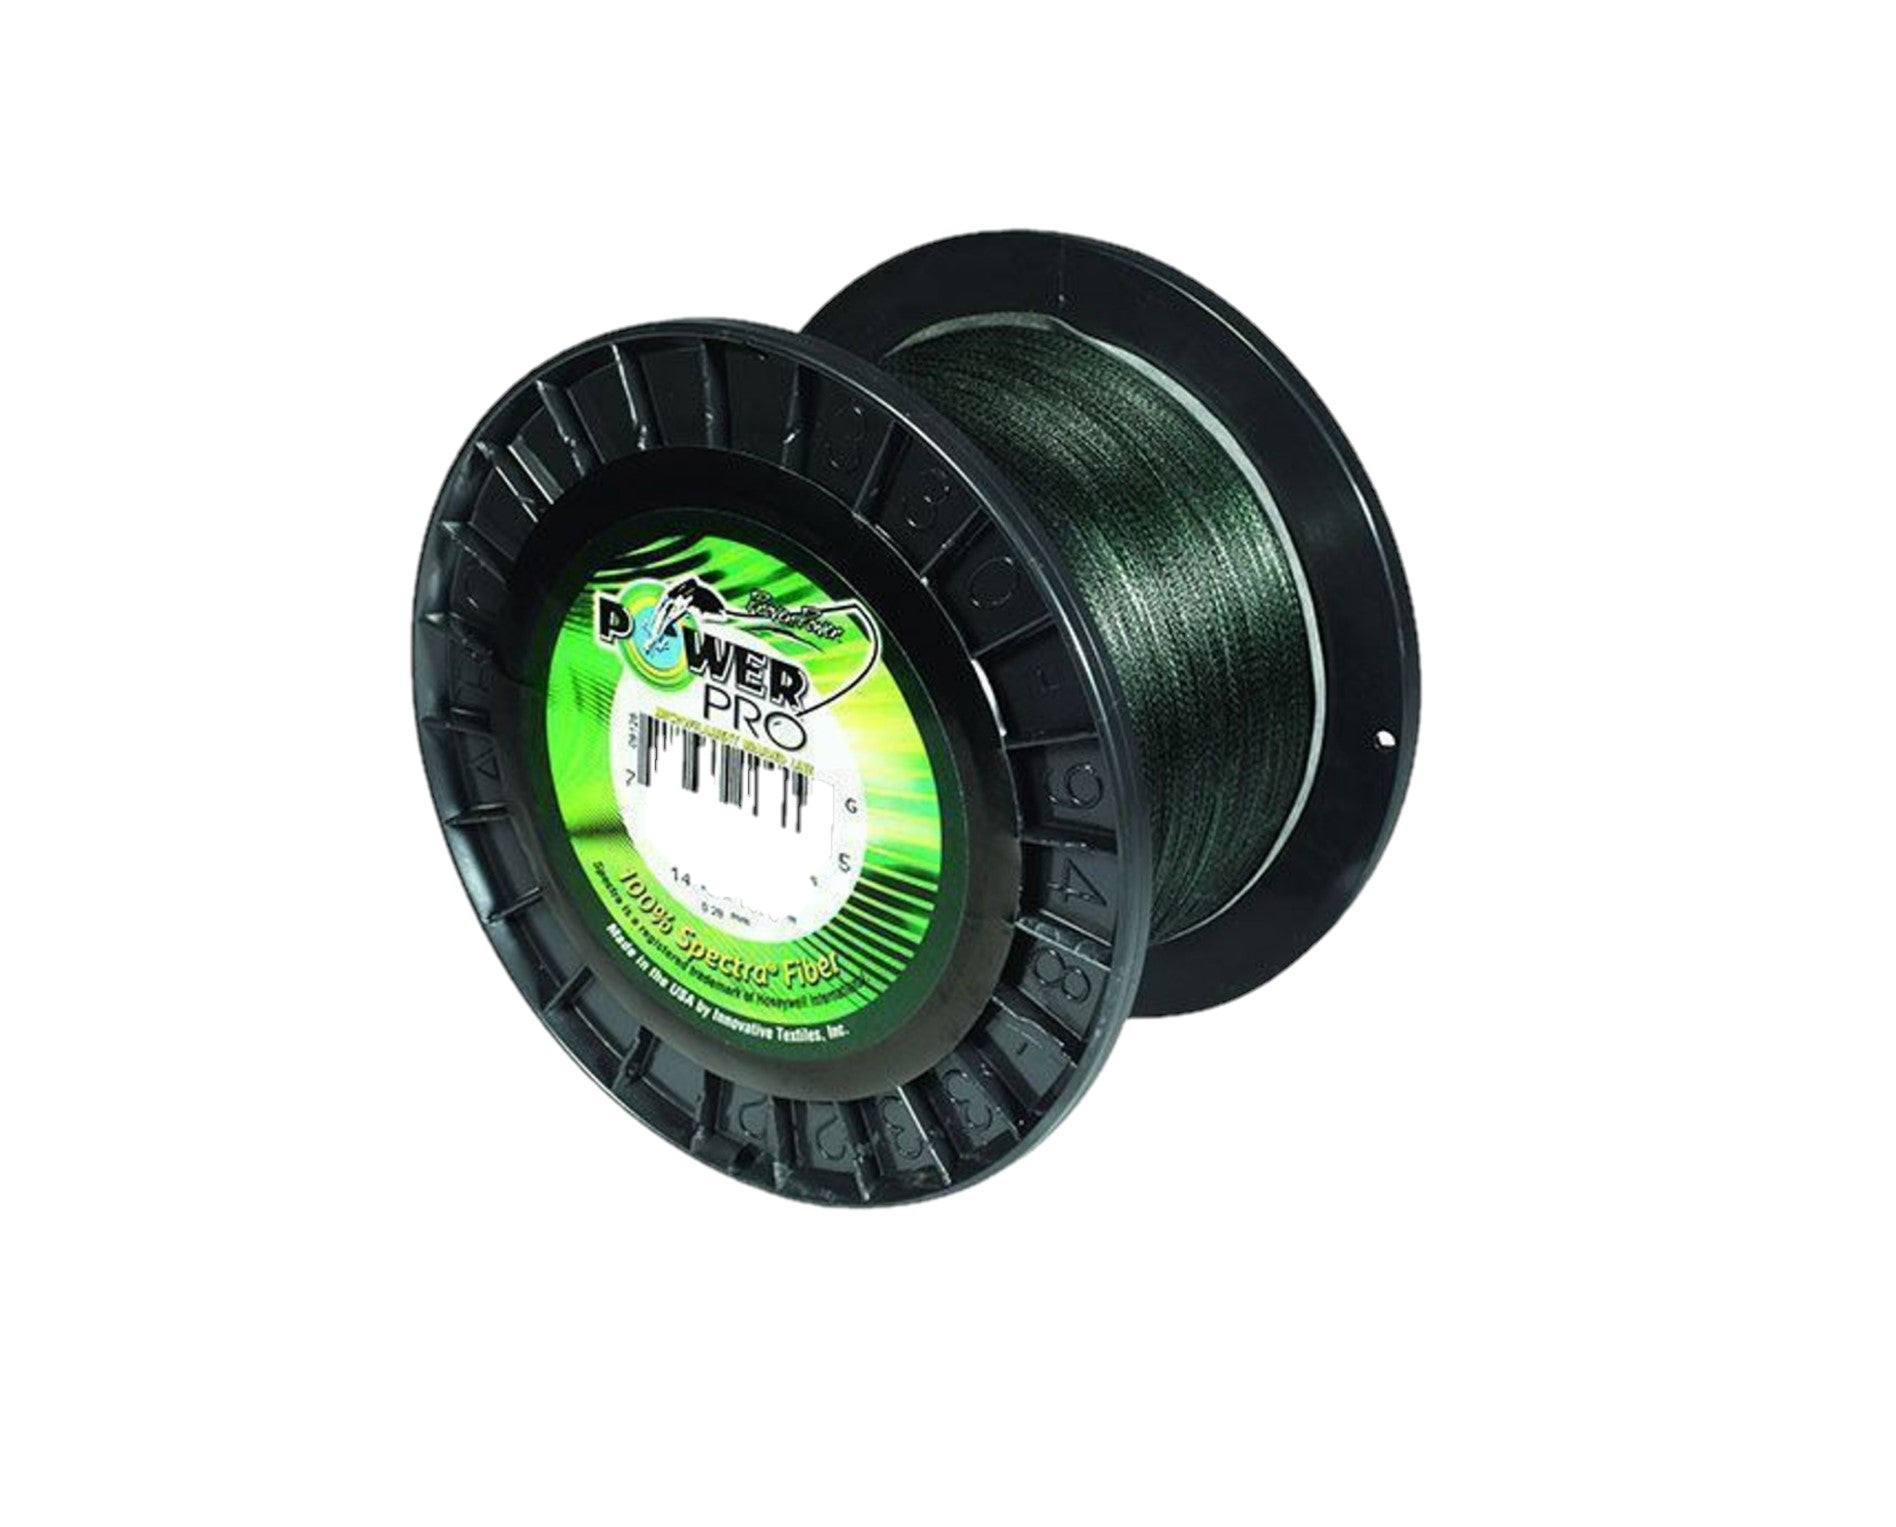 Braided Line 30lbs 150 yrd - SPOOLED ONLY with purchase of reel